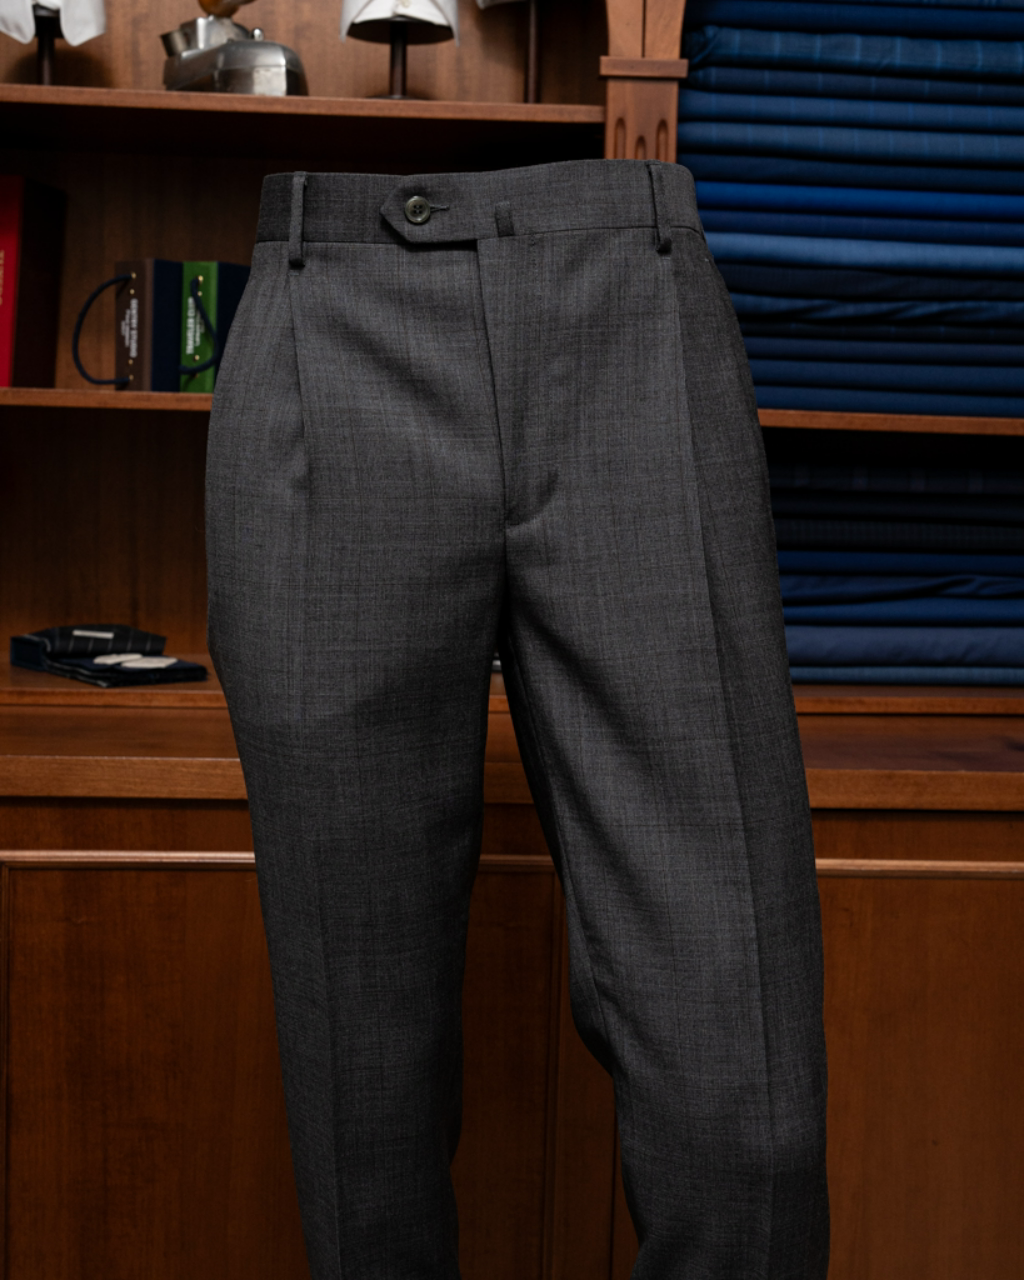 Giotto Ash Gray Suit with Red Checks